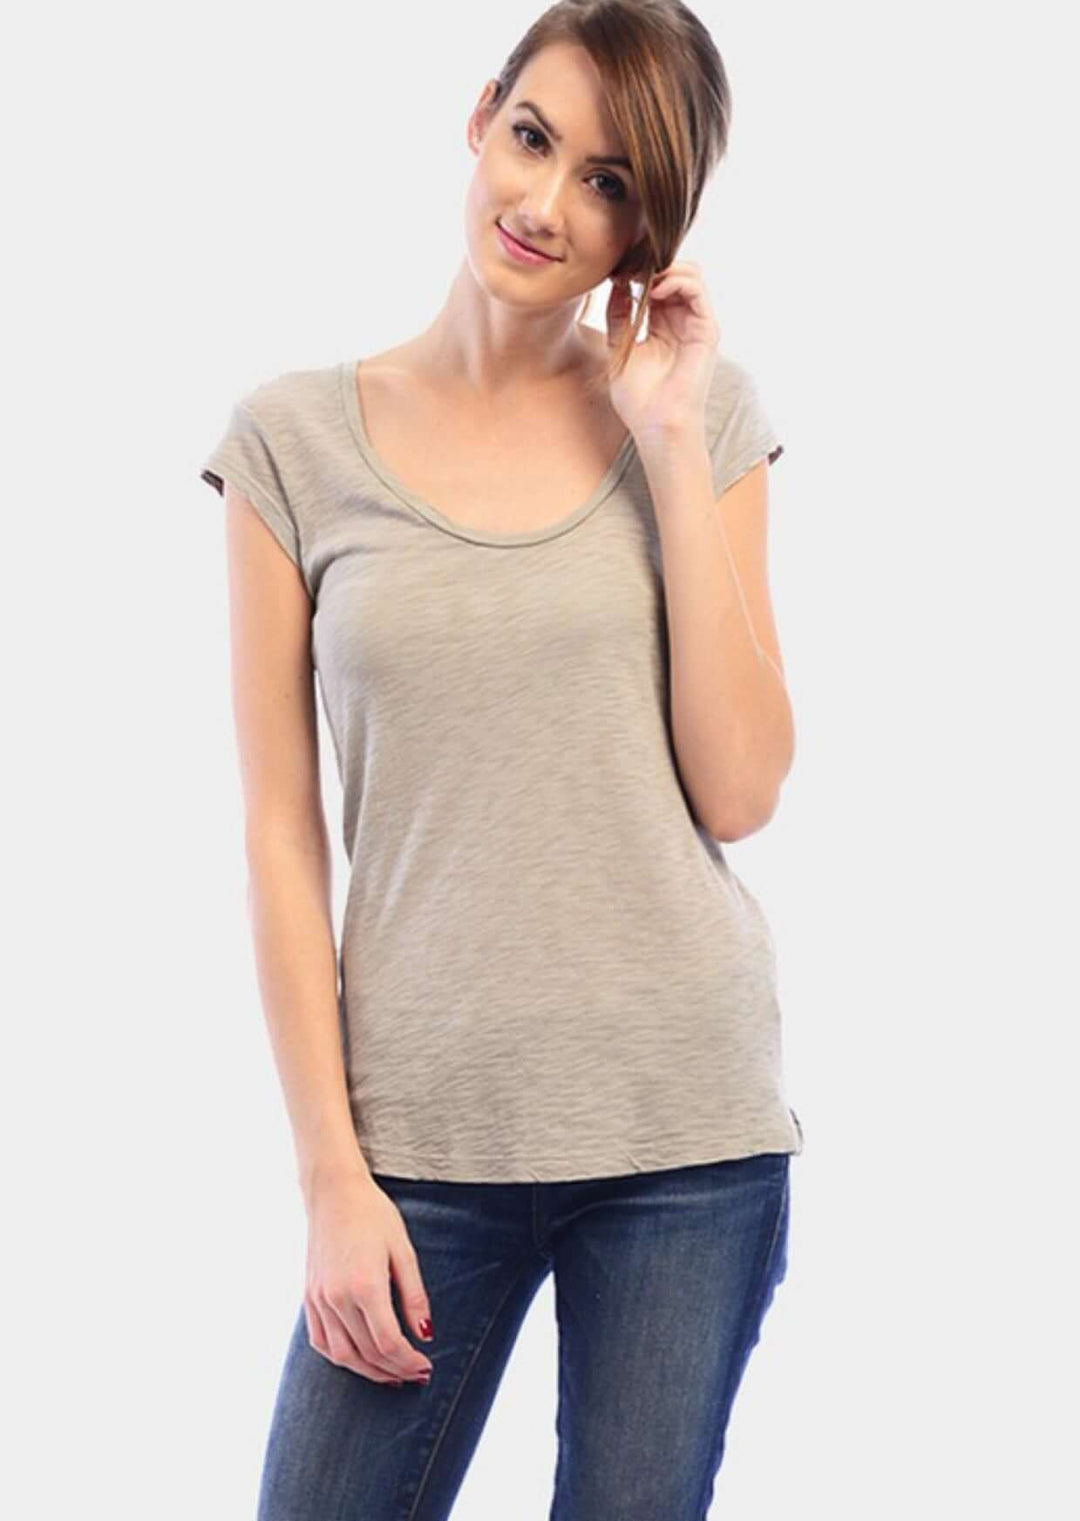 Made in USA Women's Scoop Neck Basic Garment Dyed Cotton Tee T-Shirt with Shirring at Shoulder in Taupe | Classy Cozy Cool Made in America Boutique